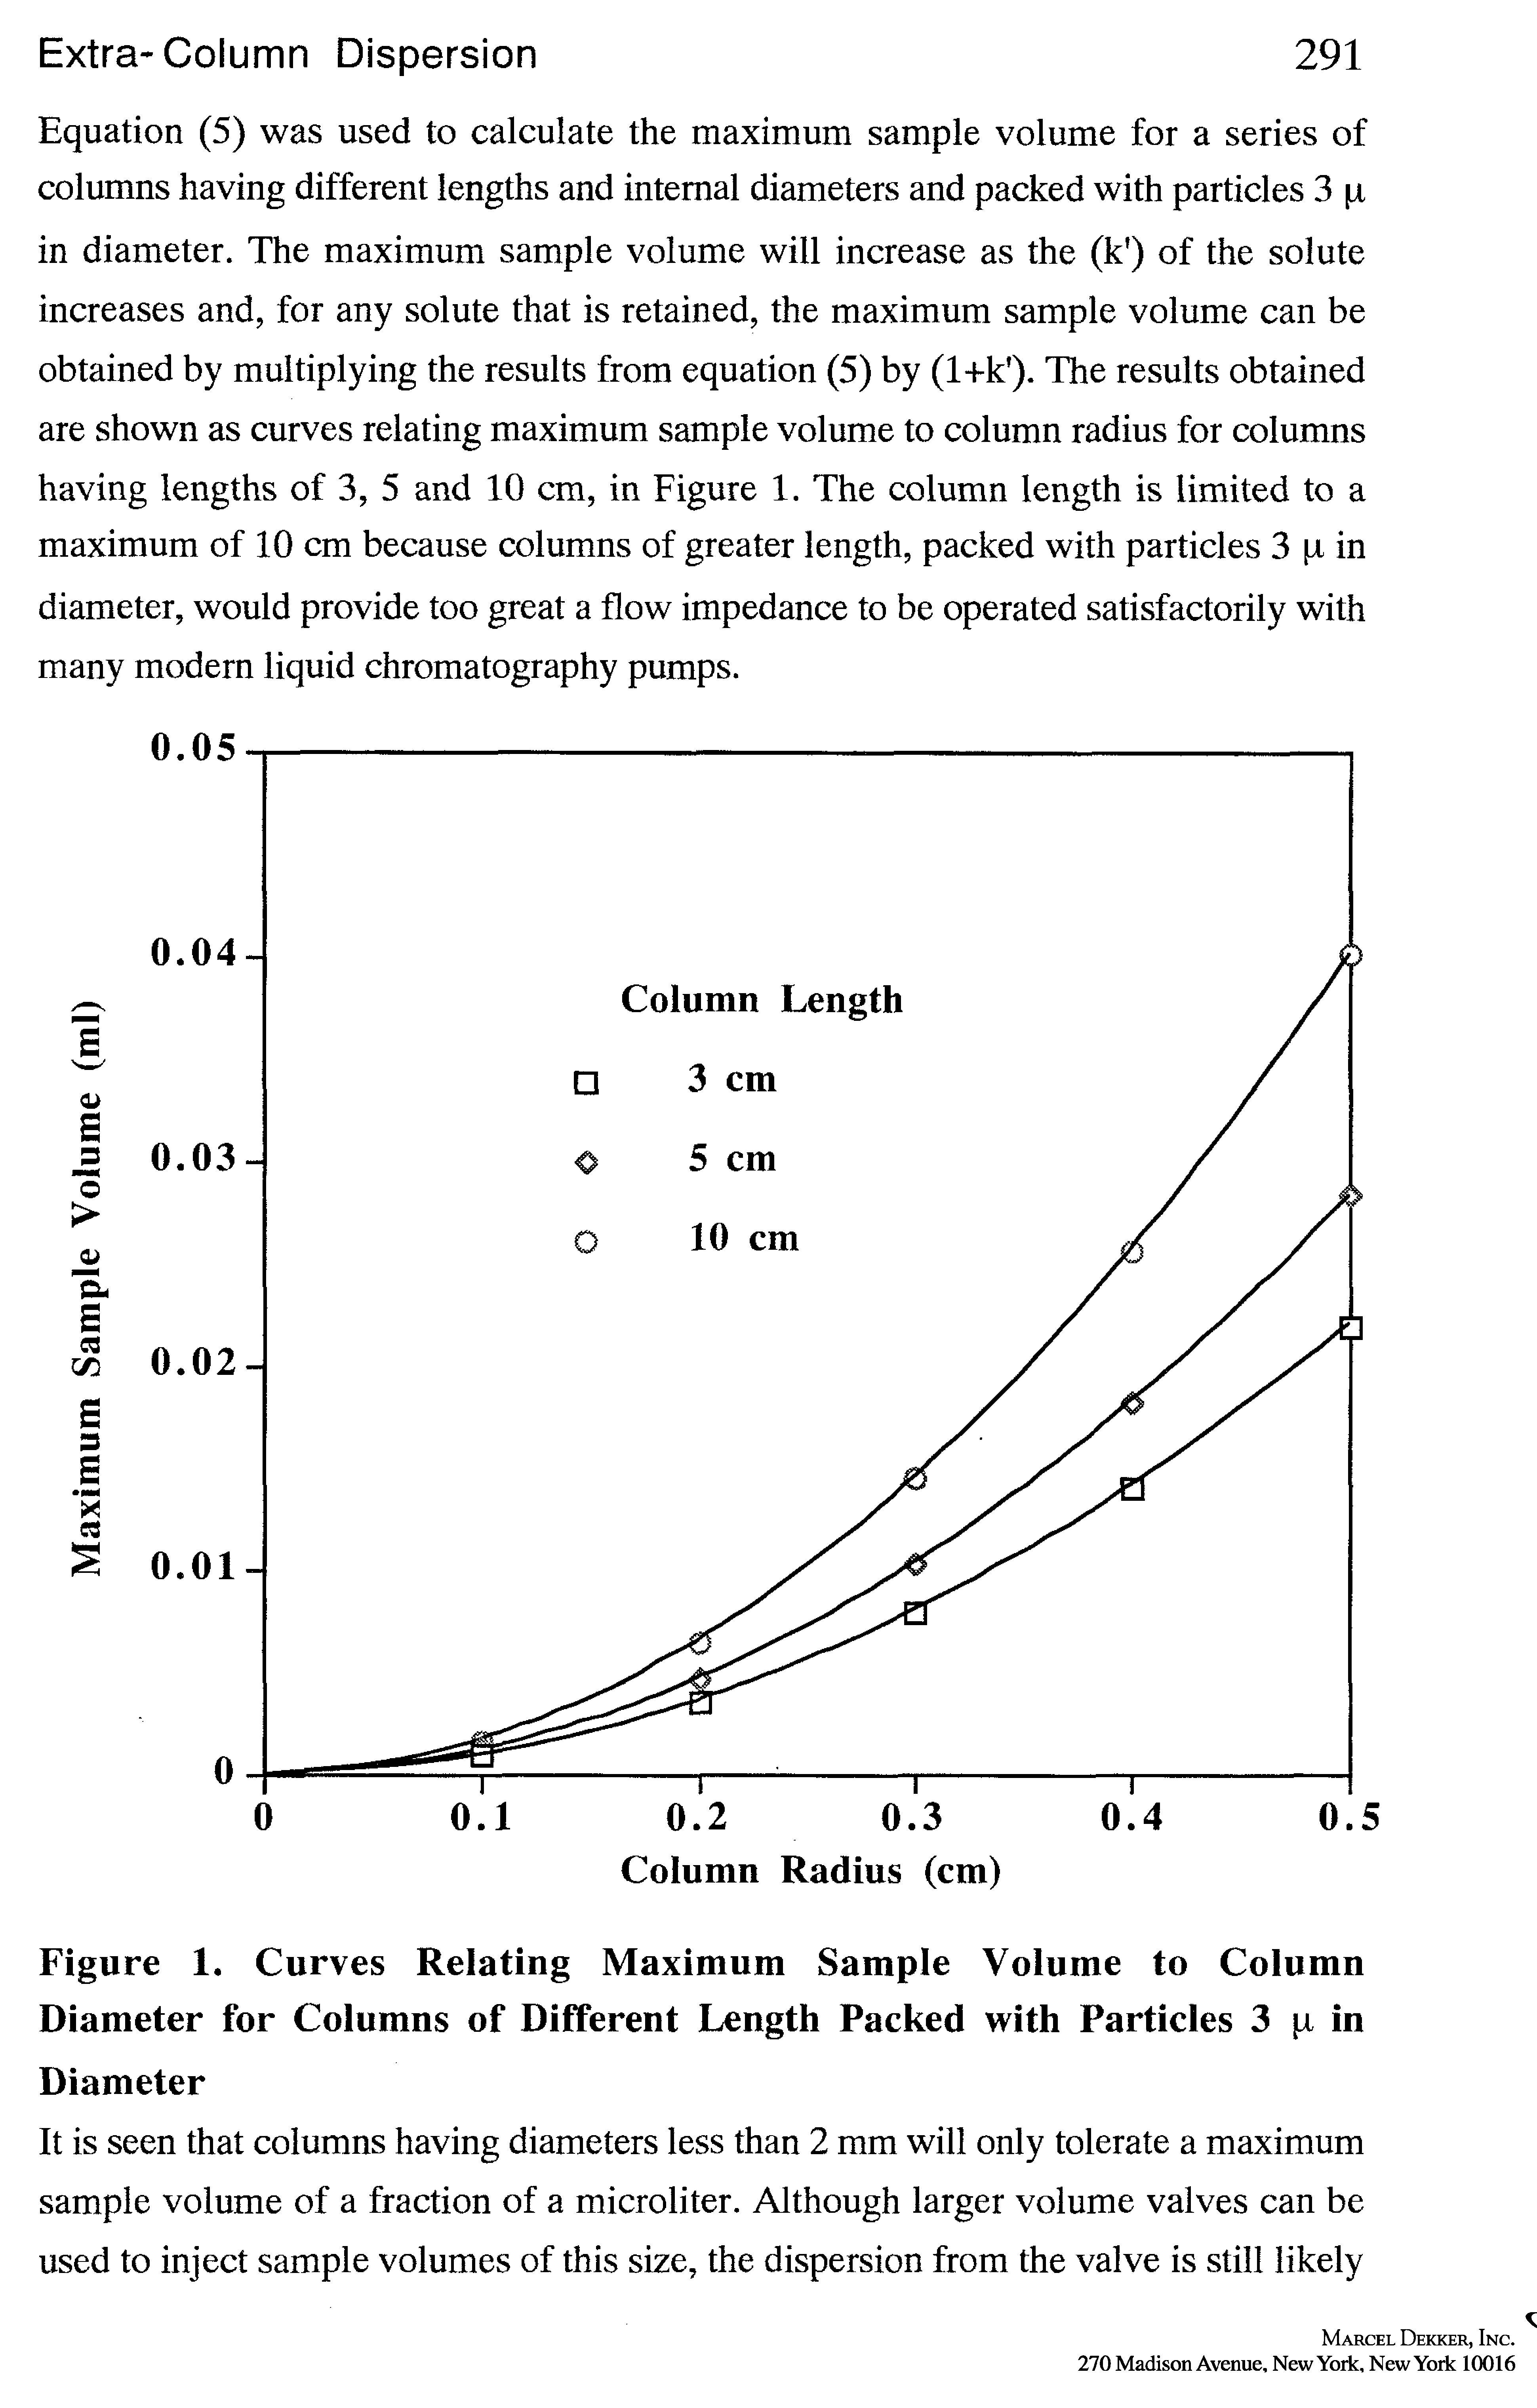 Figure 1. Curves Relating Maximum Sample Volume to Column Diameter for Columns of Different Length Packed with Particles 3 p in...